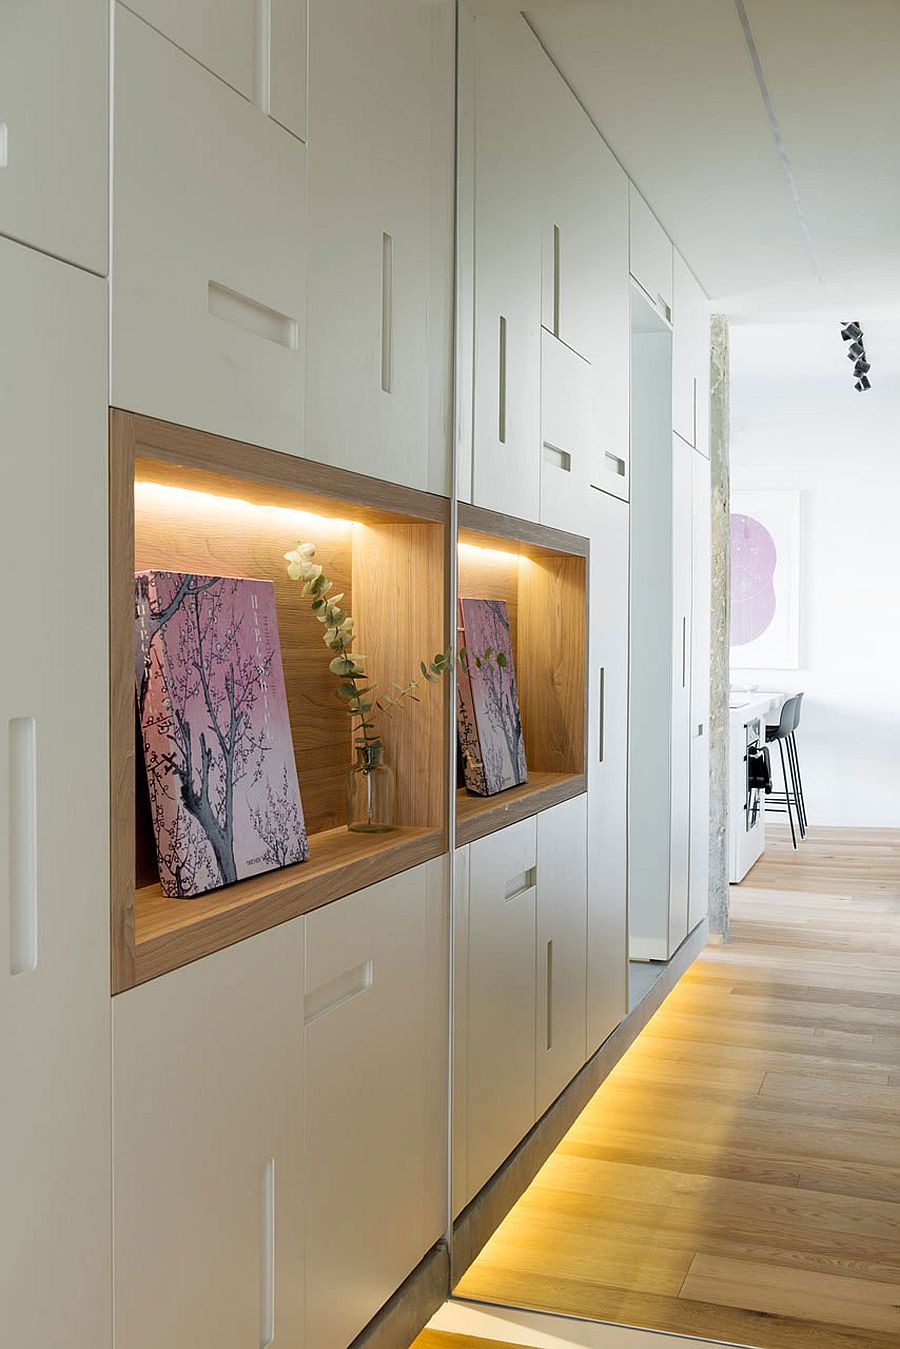 Wooden niches surrounded by bespoke cabinets at the entrance of the apartment